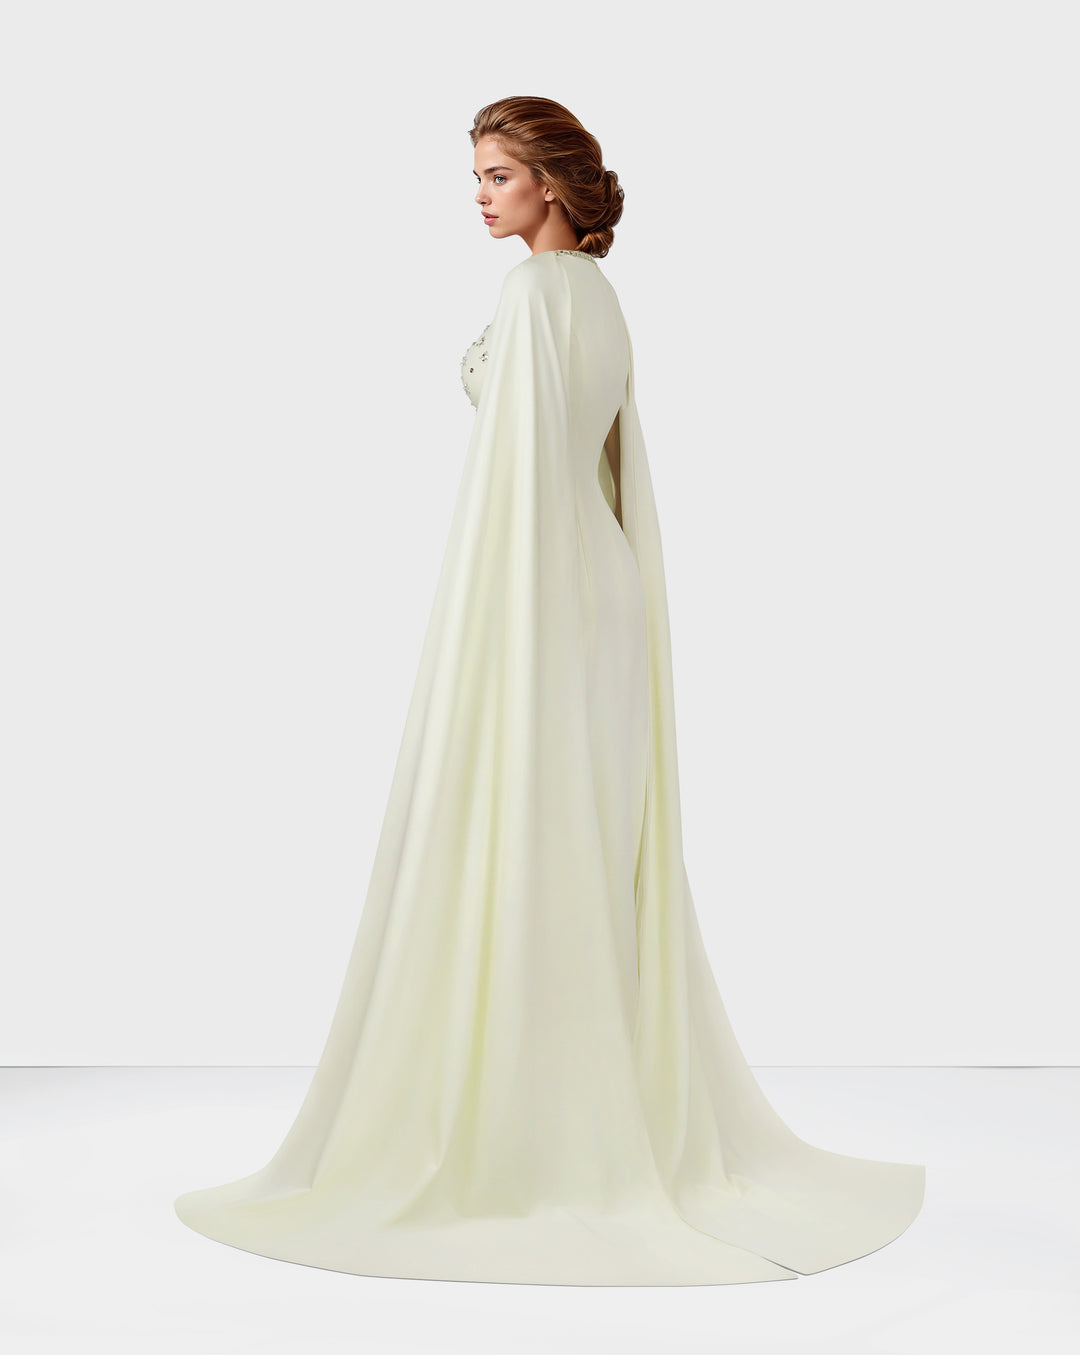 Beaded ivory dress with floor-length cape sleeves